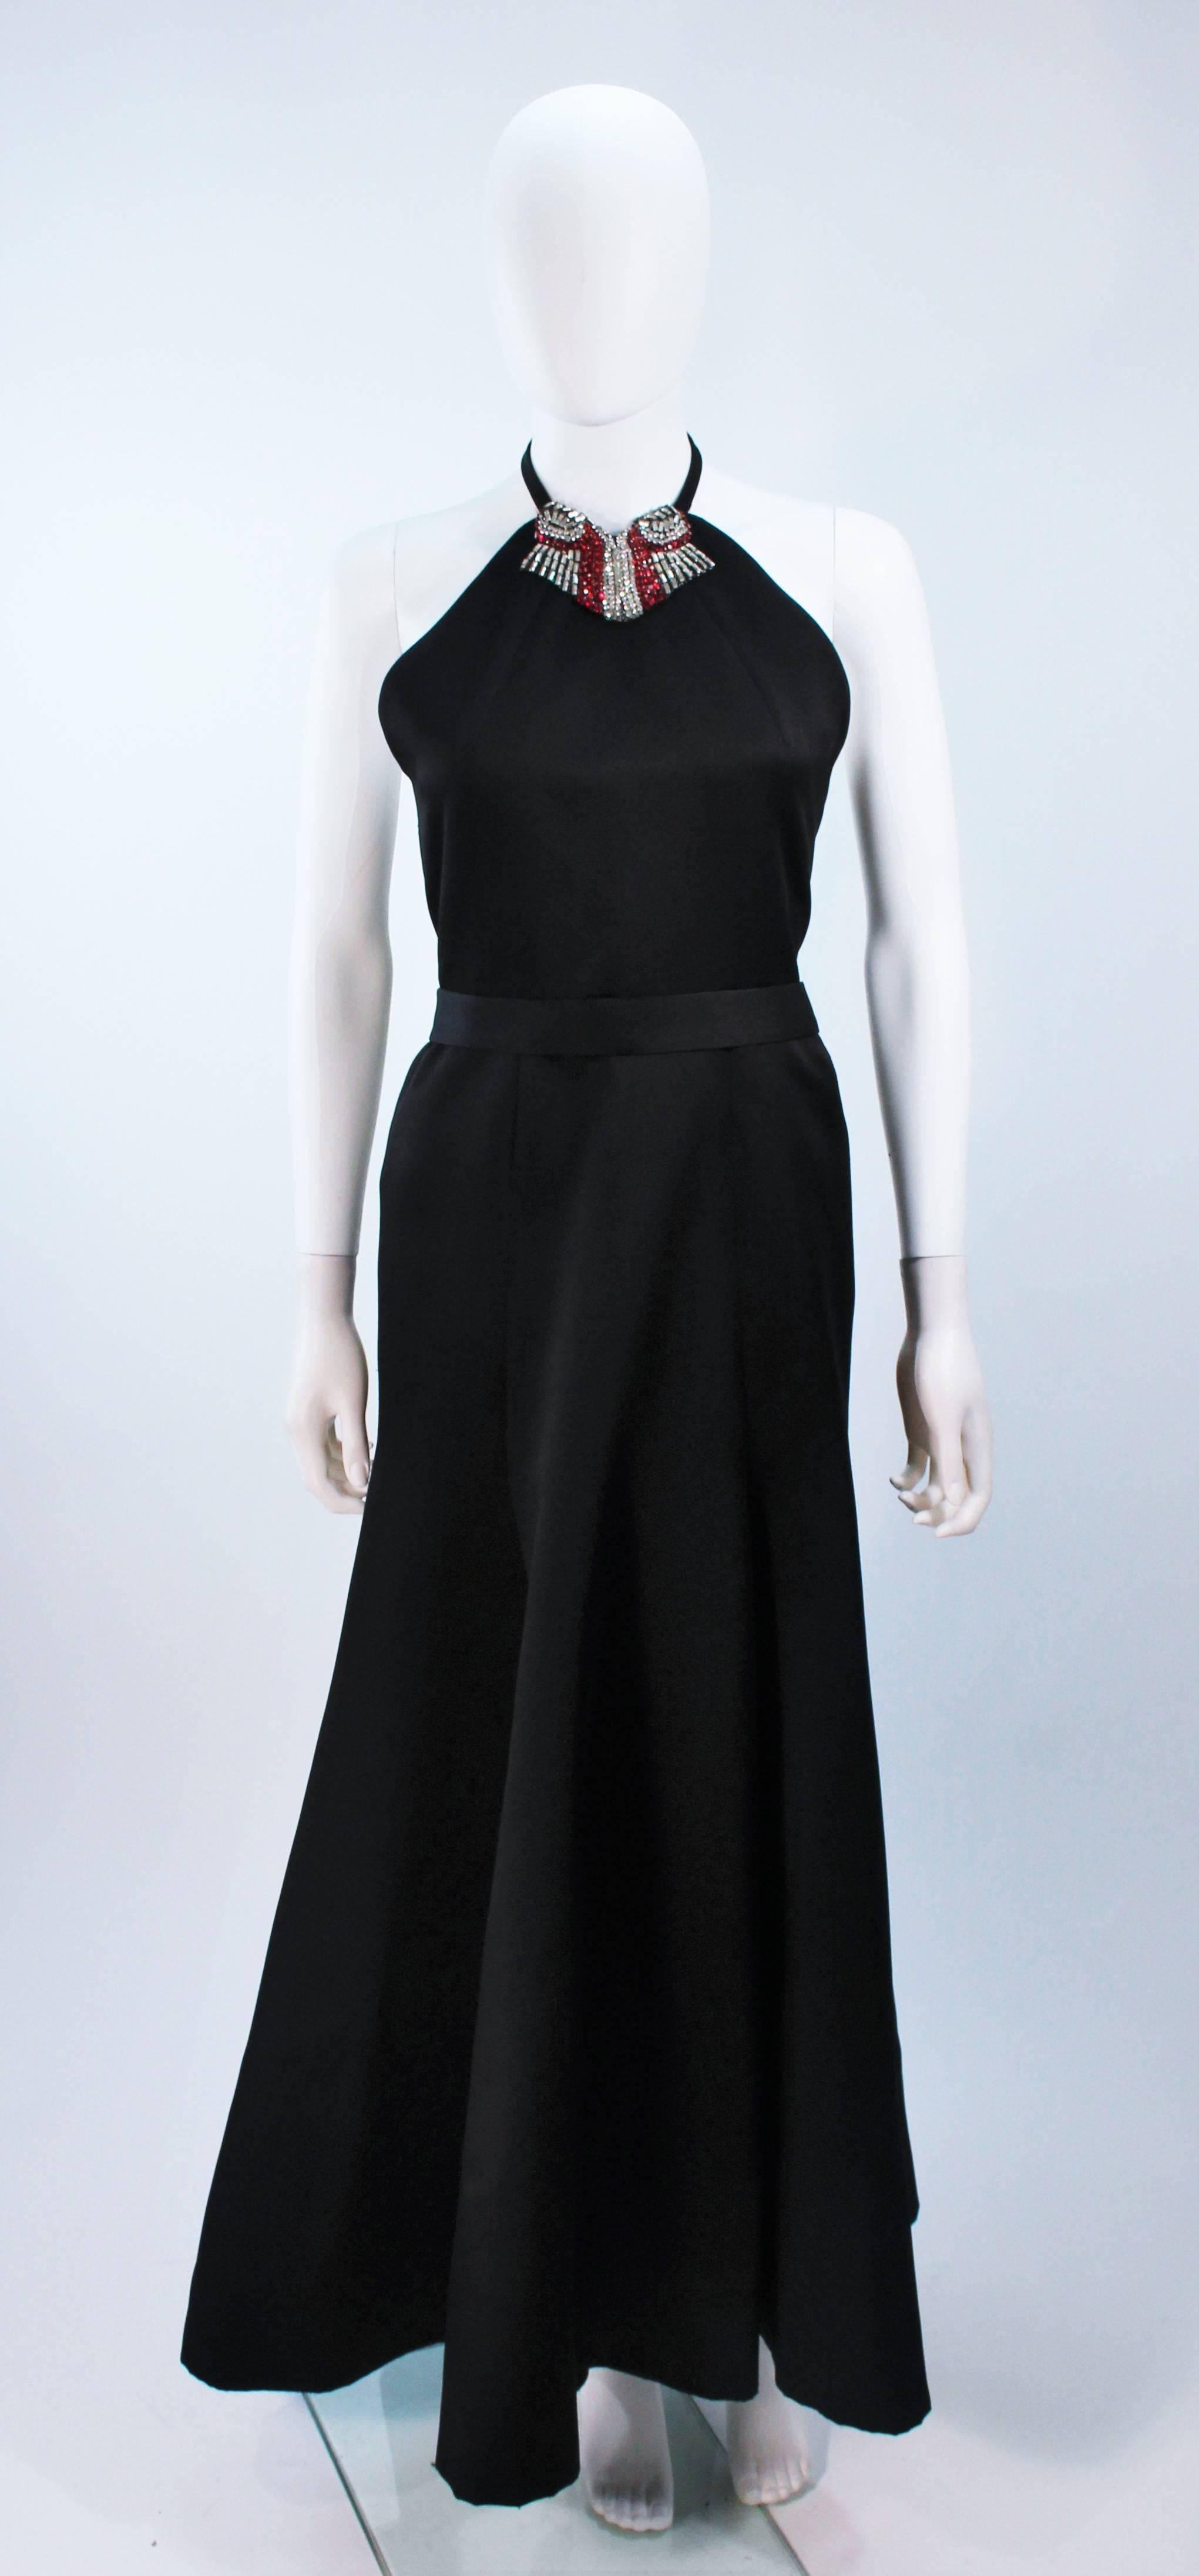  This Chloe  halter style gown is composed of a black satin silk, with a white and red rhinestone collar. There is a center back zipper closure and belt. In excellent vintage condition. 

  **Please cross-reference measurements for personal